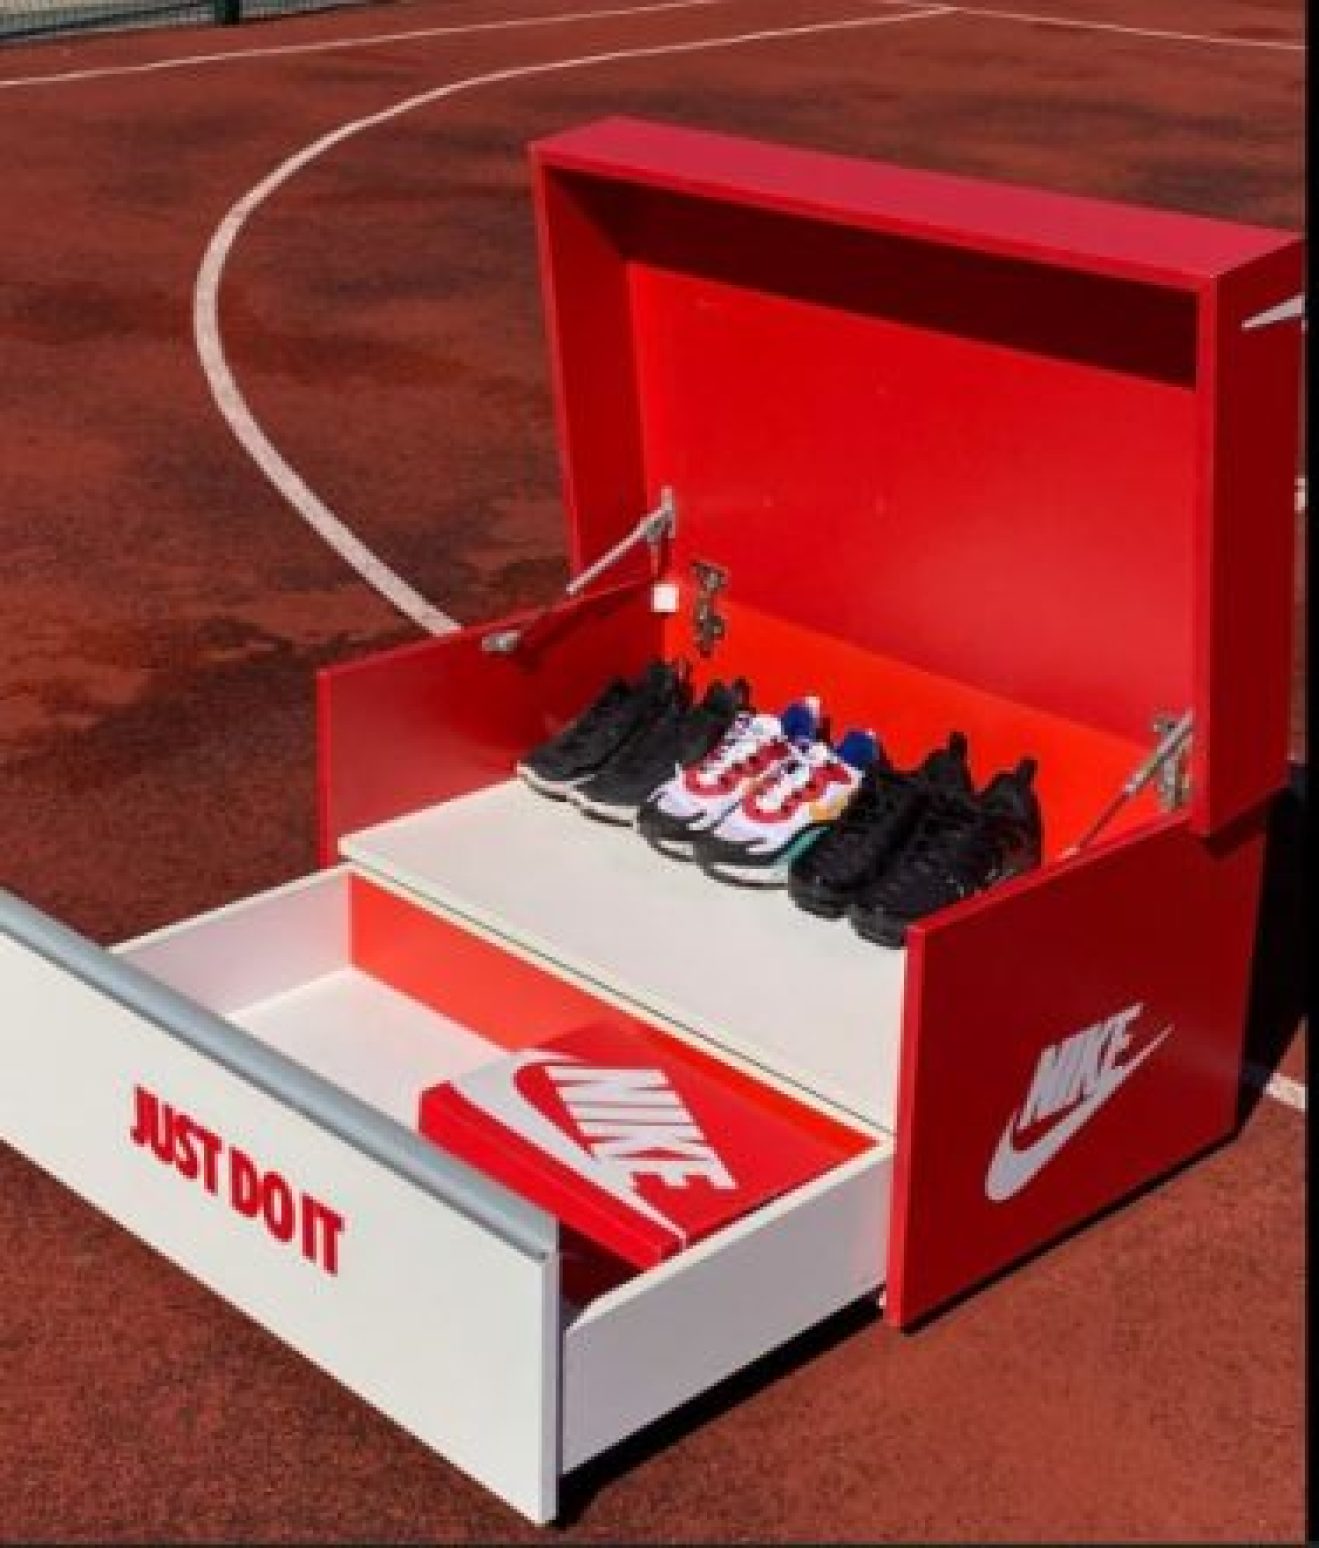 5 Giant Nike Shoe Boxes: Are They Cool? - The Shoe Box NYC